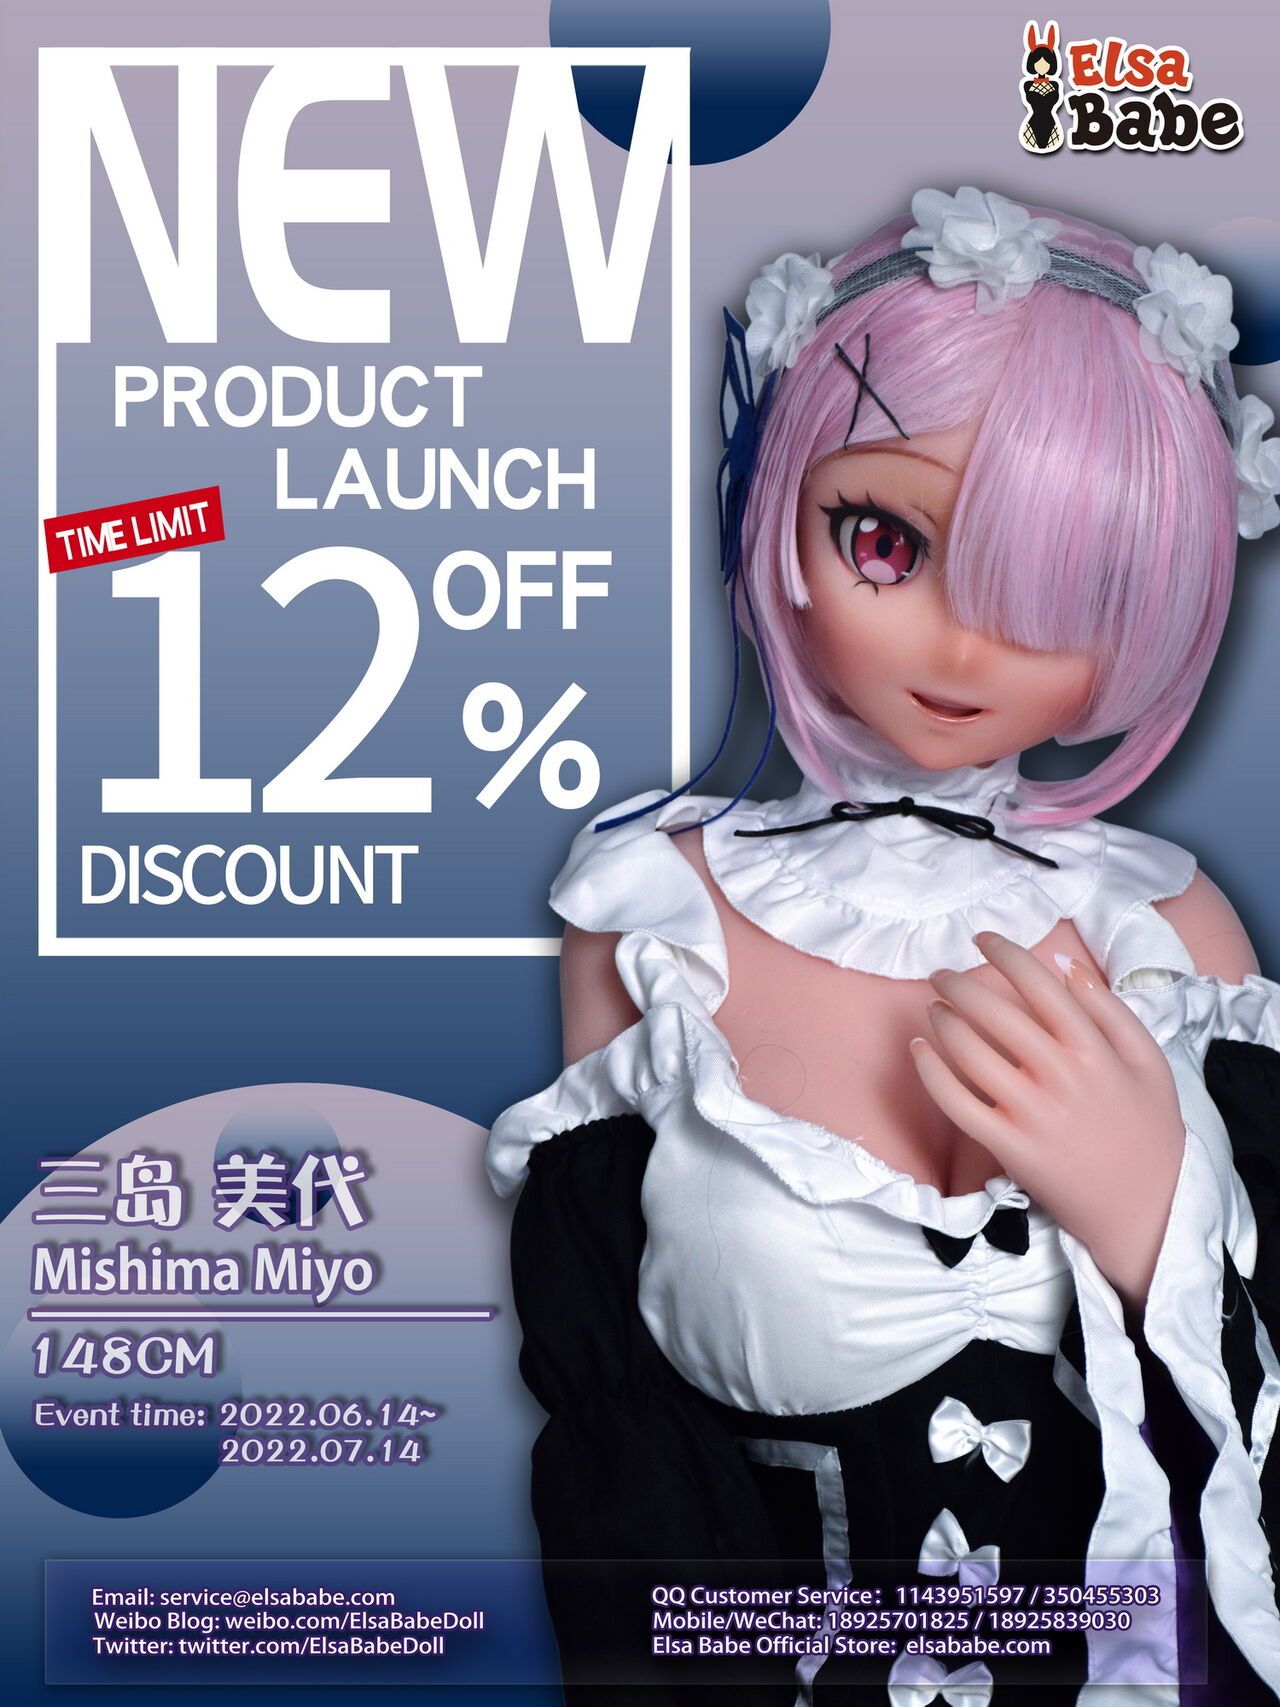 Elsa Babe [148CM AHR006 Mishima Miyo] 12% off the first launch of new doll! 2022.06.14 2